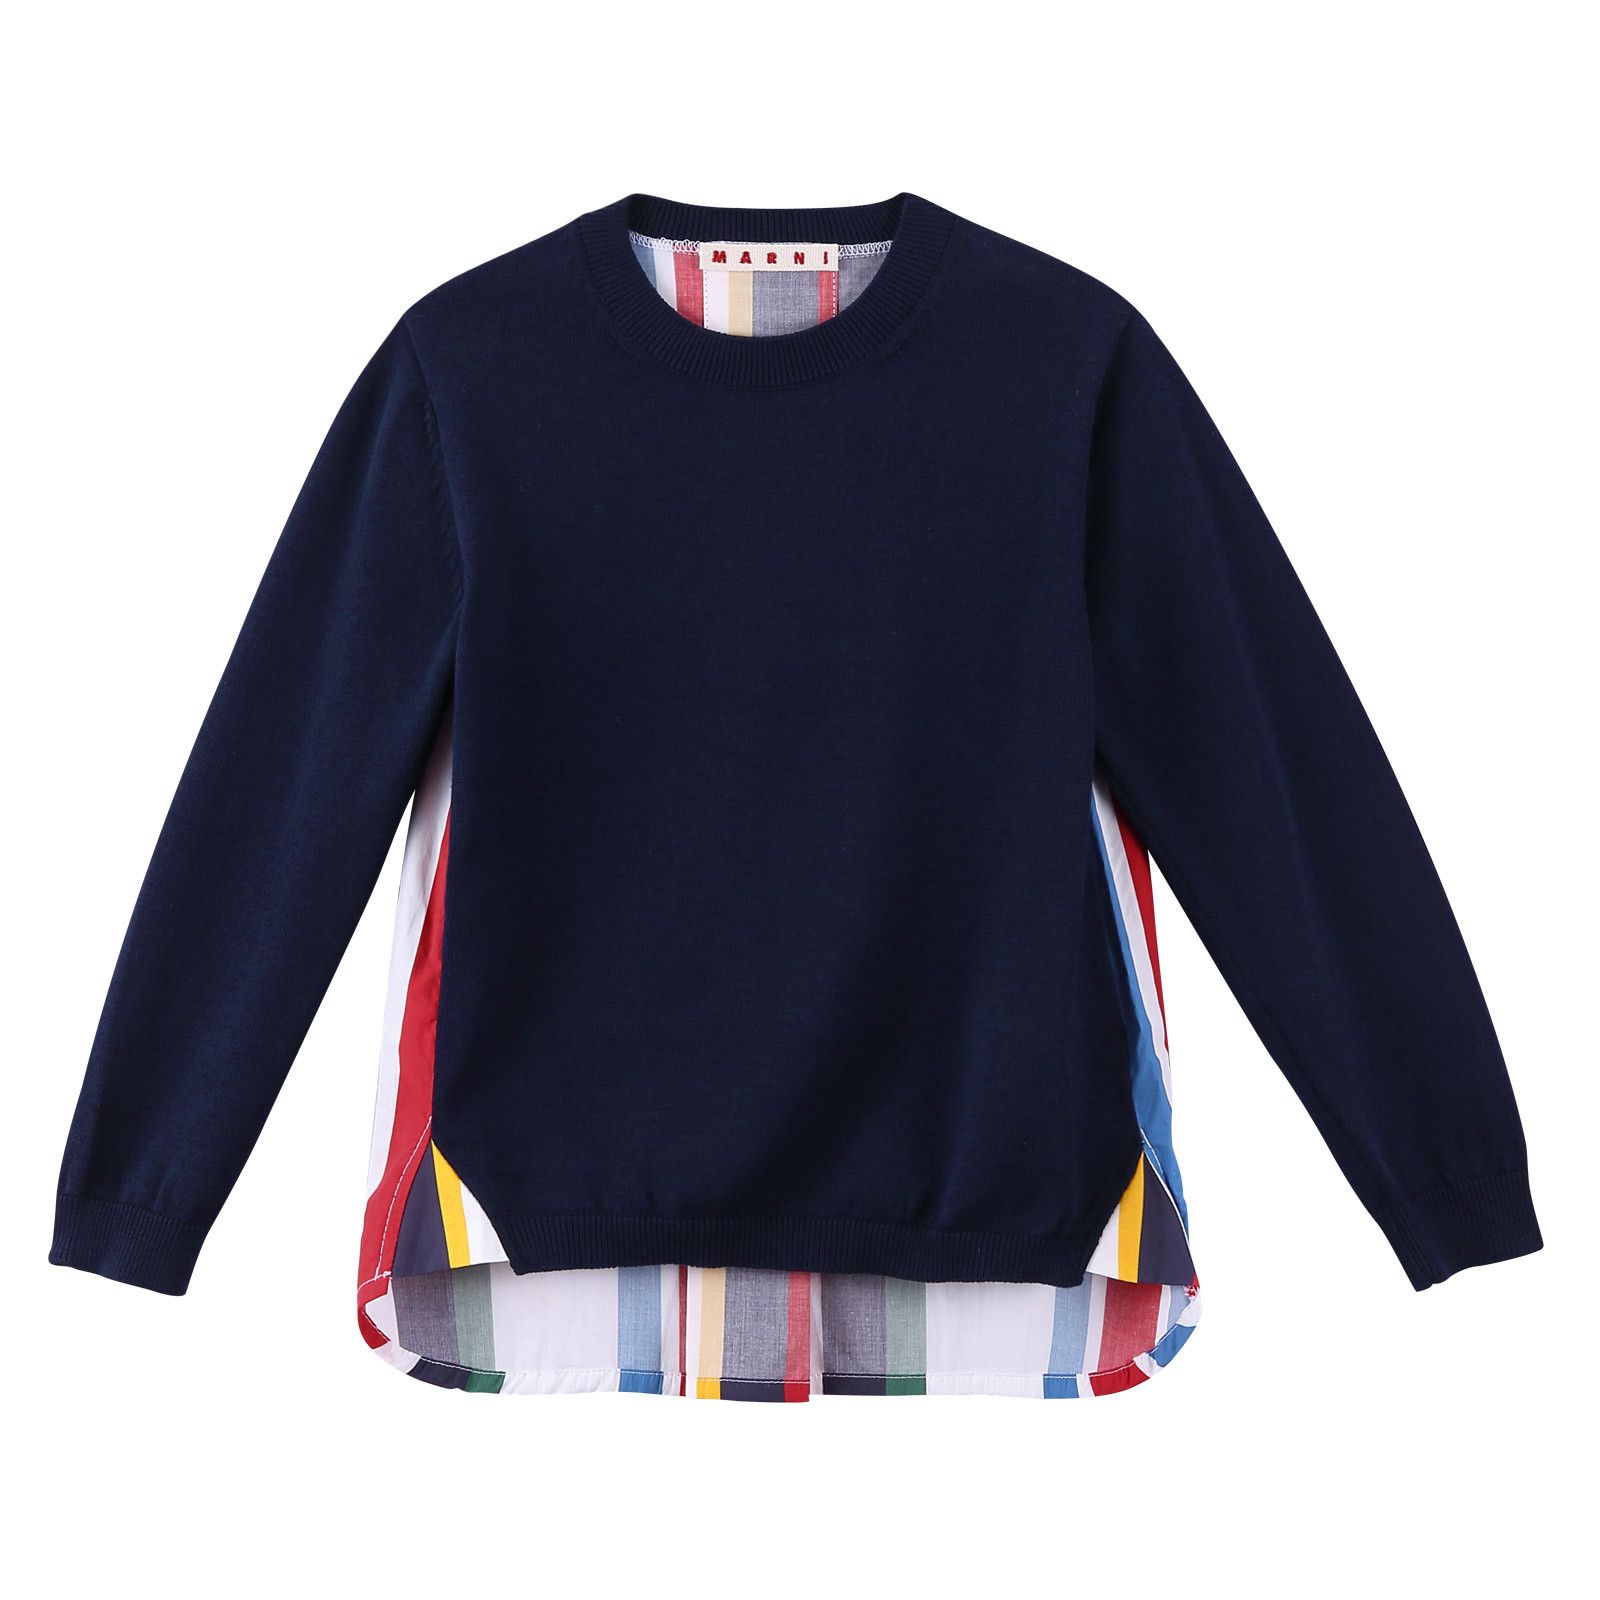 Girls Navy Blue&Multicolor Striped Knitted Cotton Sweater - CÉMAROSE | Children's Fashion Store - 1